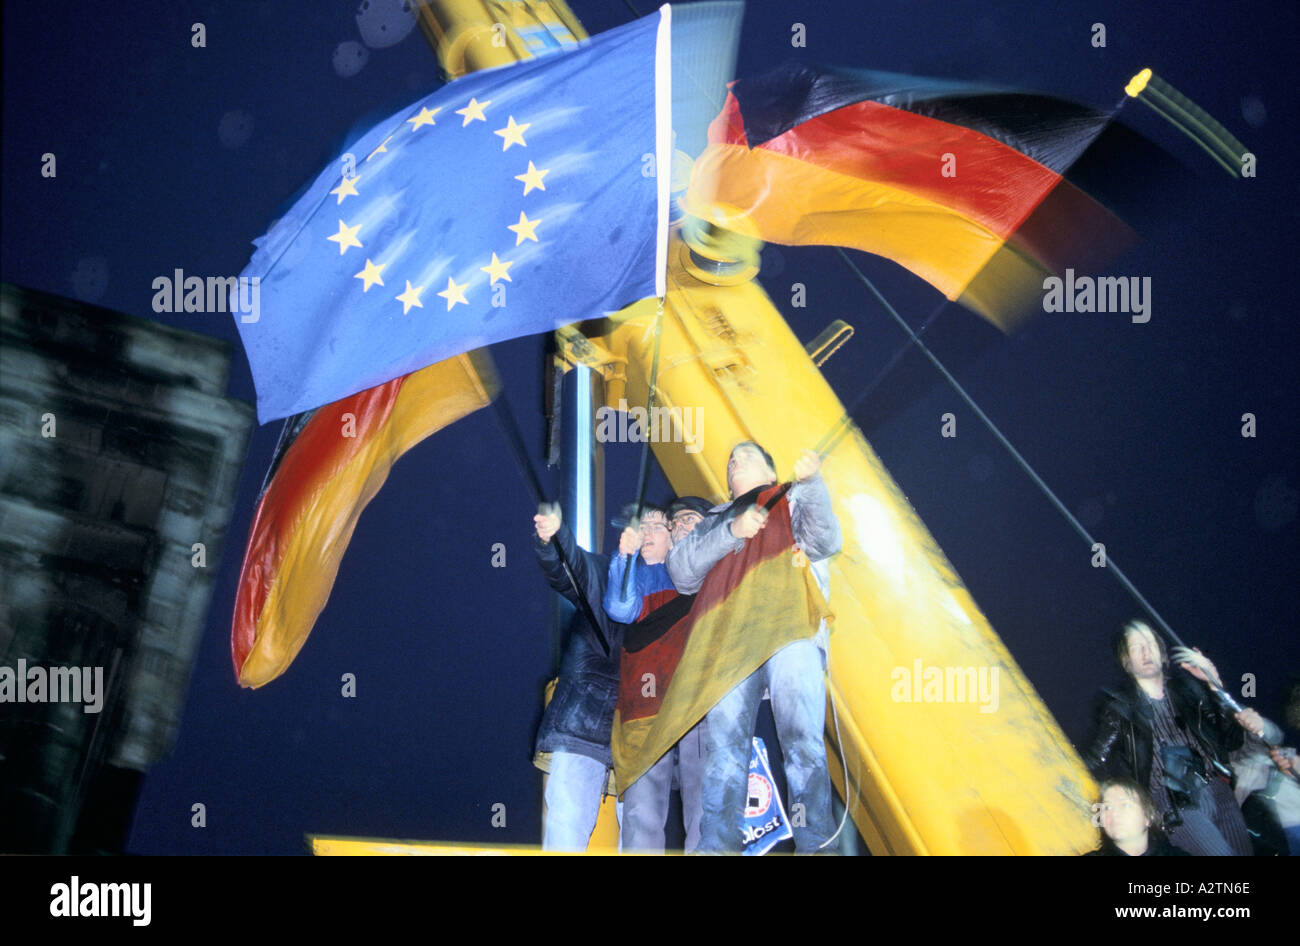 people waving the german and european flags in celebration of the brandenburg gate being opened 1989 Stock Photo